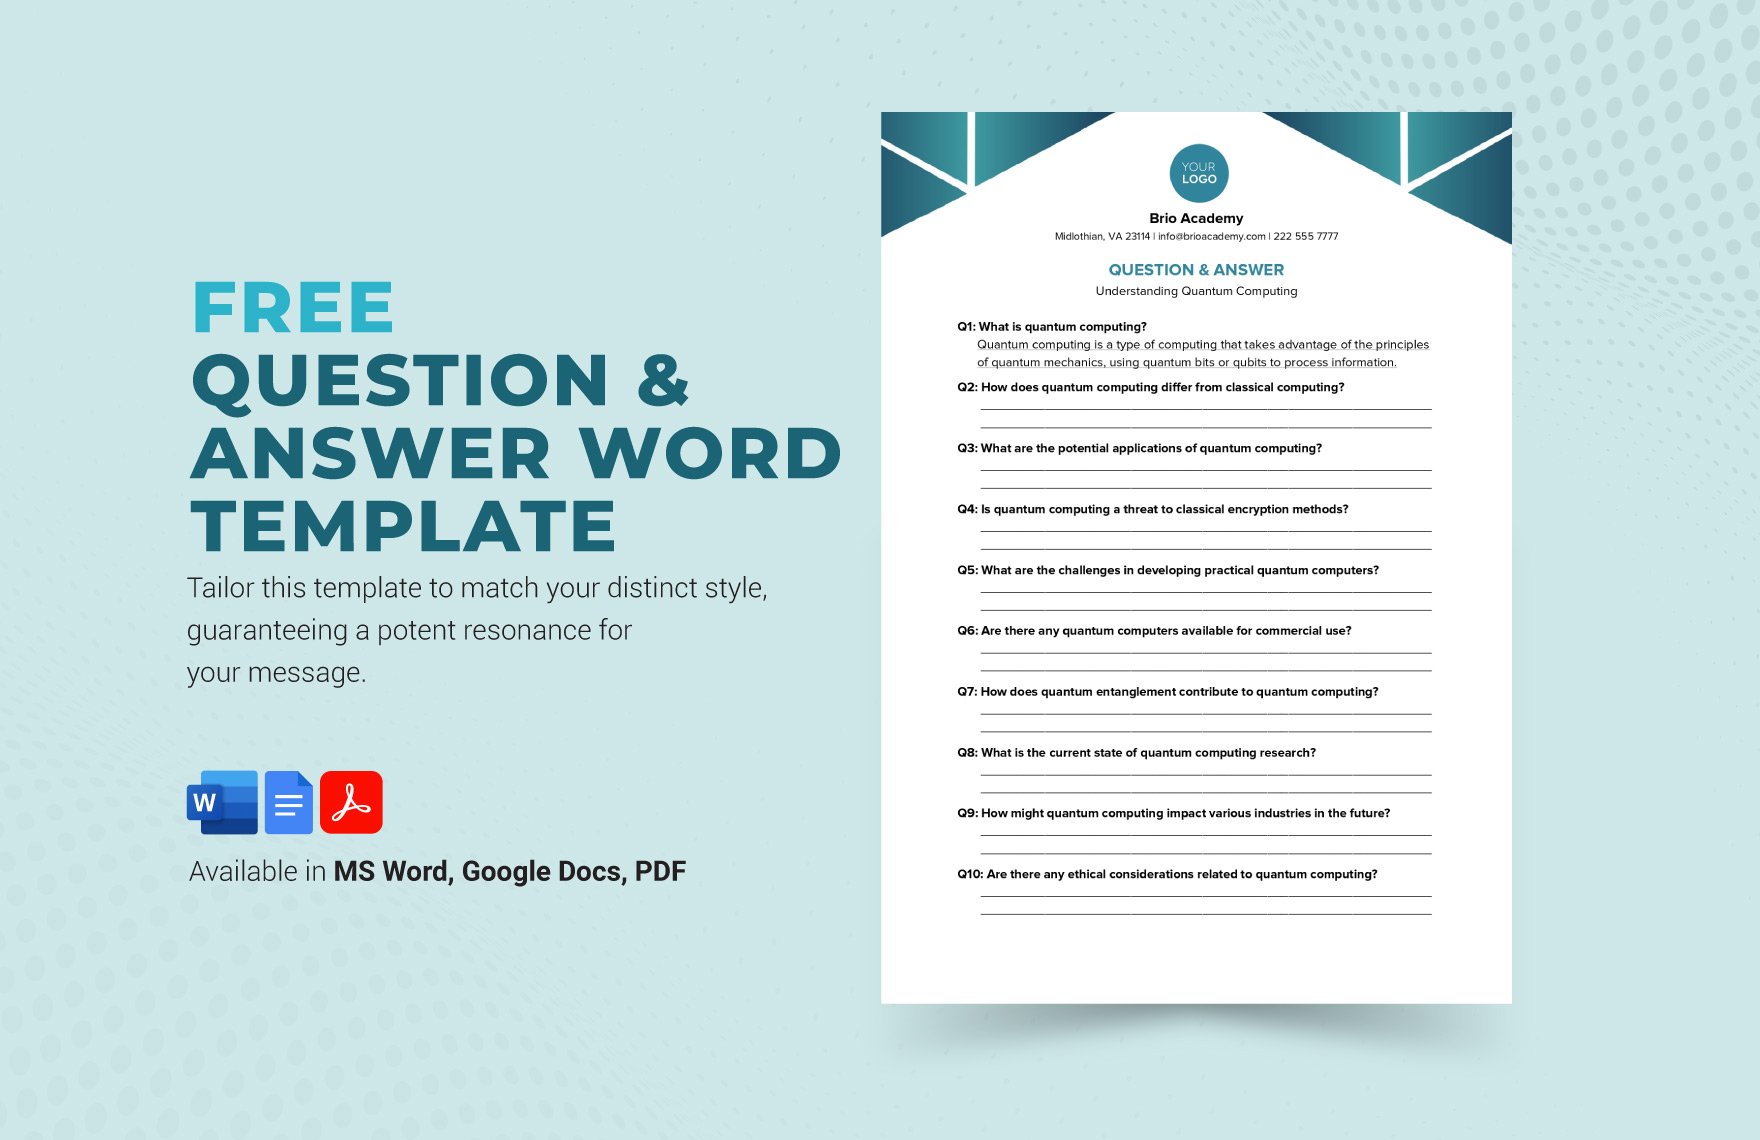 Question & Answer Word Template